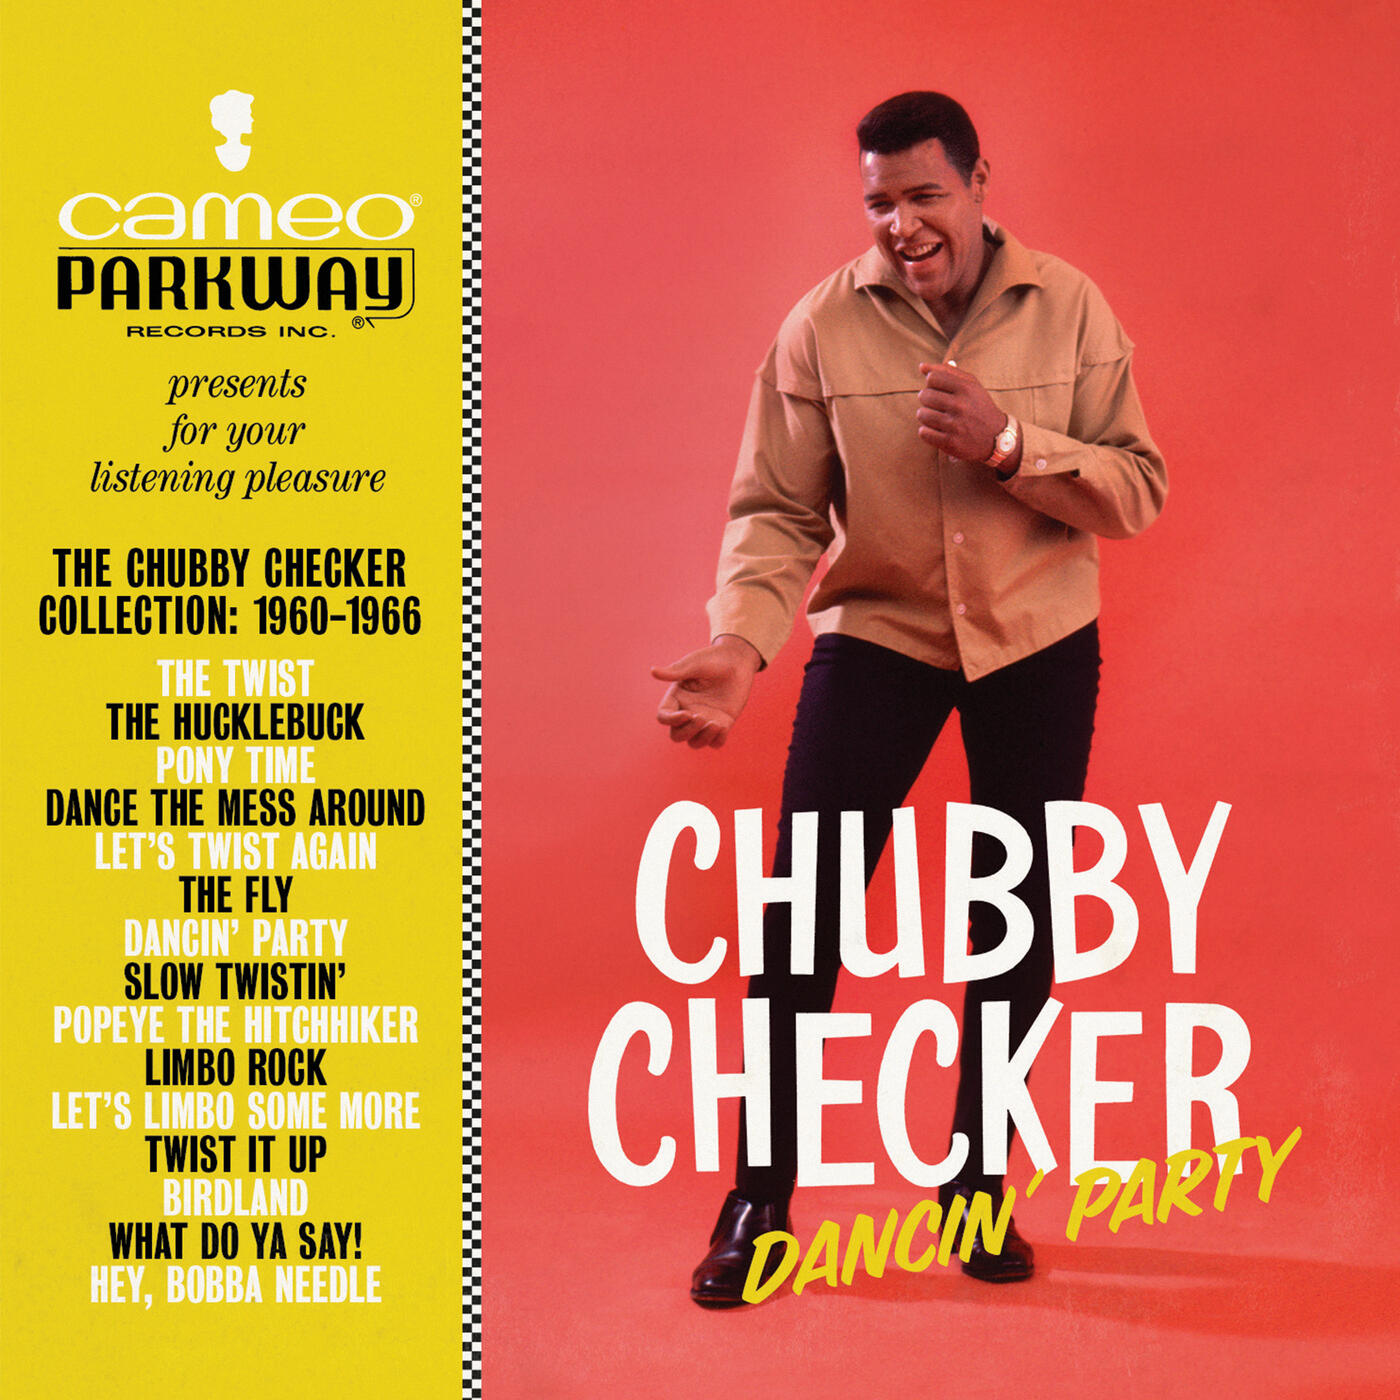 Chubby Checker Dancin Party The Chubby Checker Collection 1960 